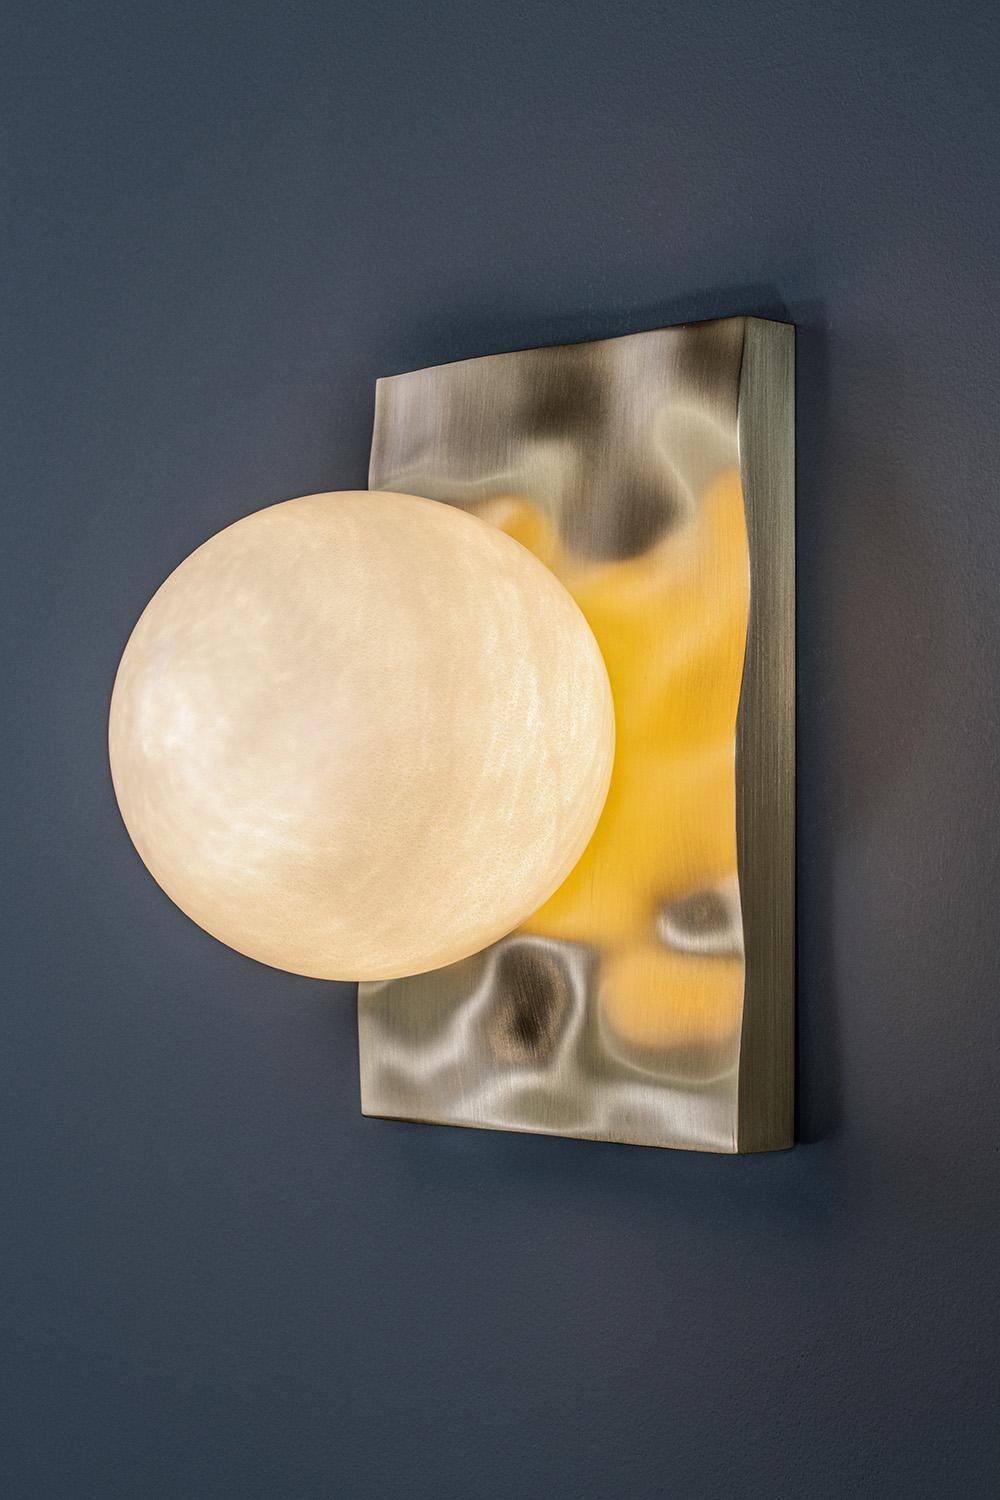 Modern CB Sconce 201 - Handblown glass and brass wall sconce by Andrea Claire Studio For Sale